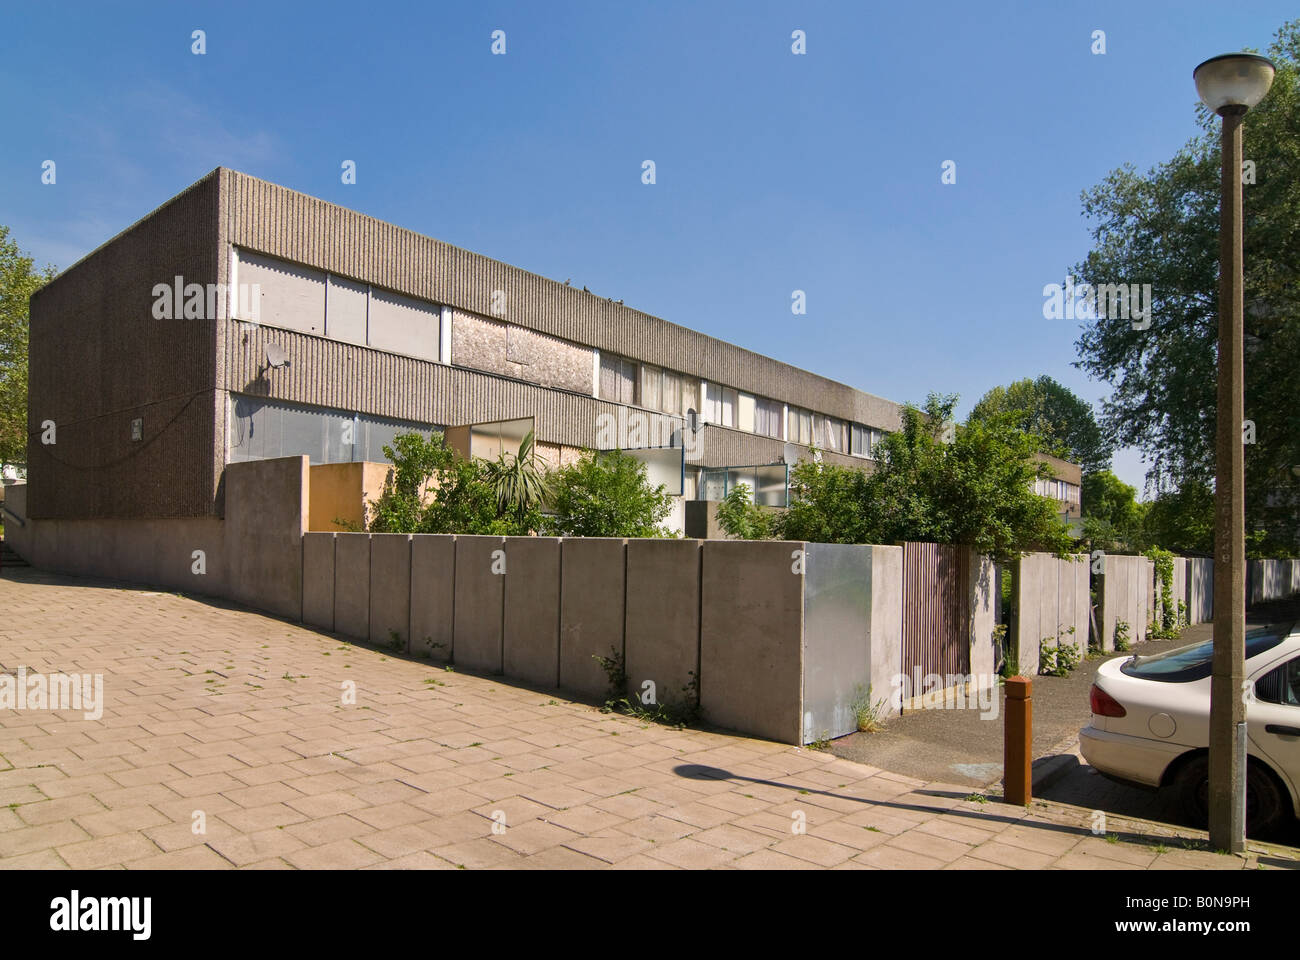 Horizontal wide angle of an empty block of low rise houses on the Ferrier Estate in Kidbrooke Park on a bright sunny day Stock Photo